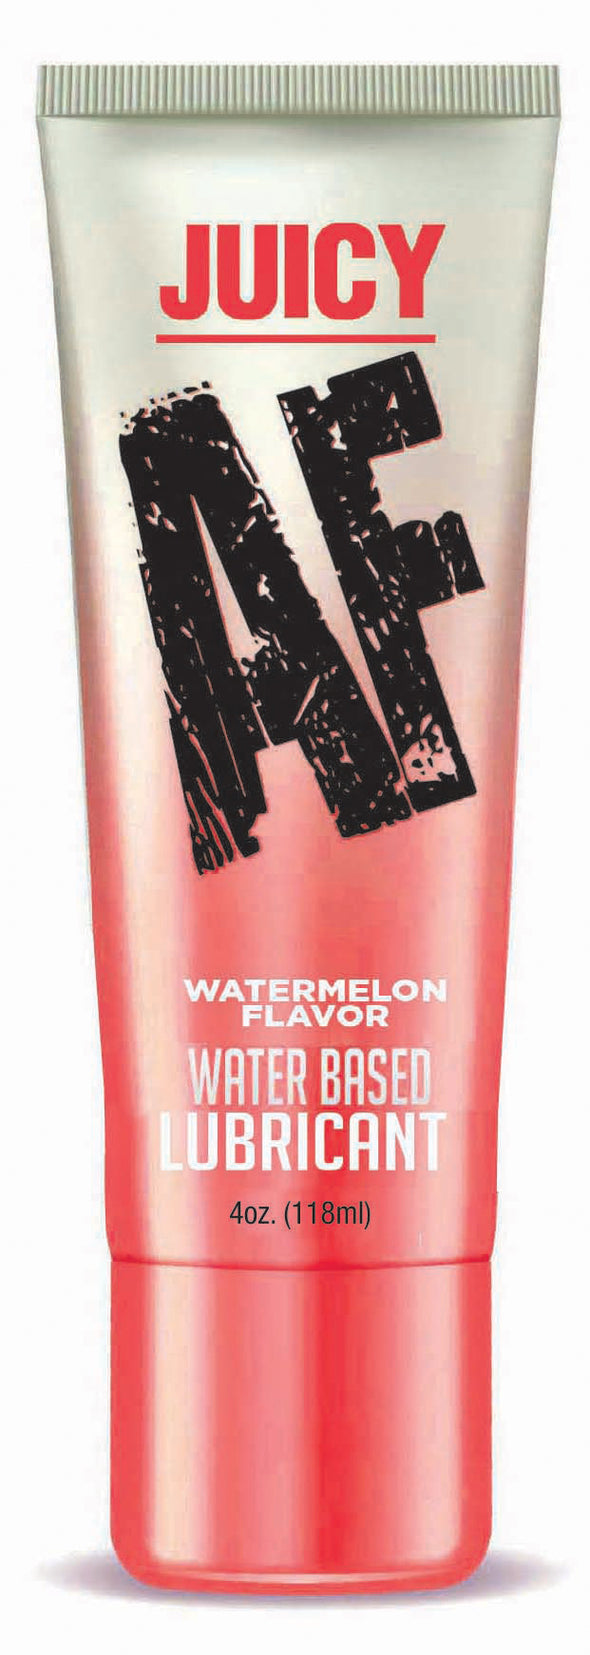 Juicy Af - Watermelon Water Based Flavored Lubricant - 4 Oz-Lubricants Creams & Glides-Little Genie-Andy's Adult World